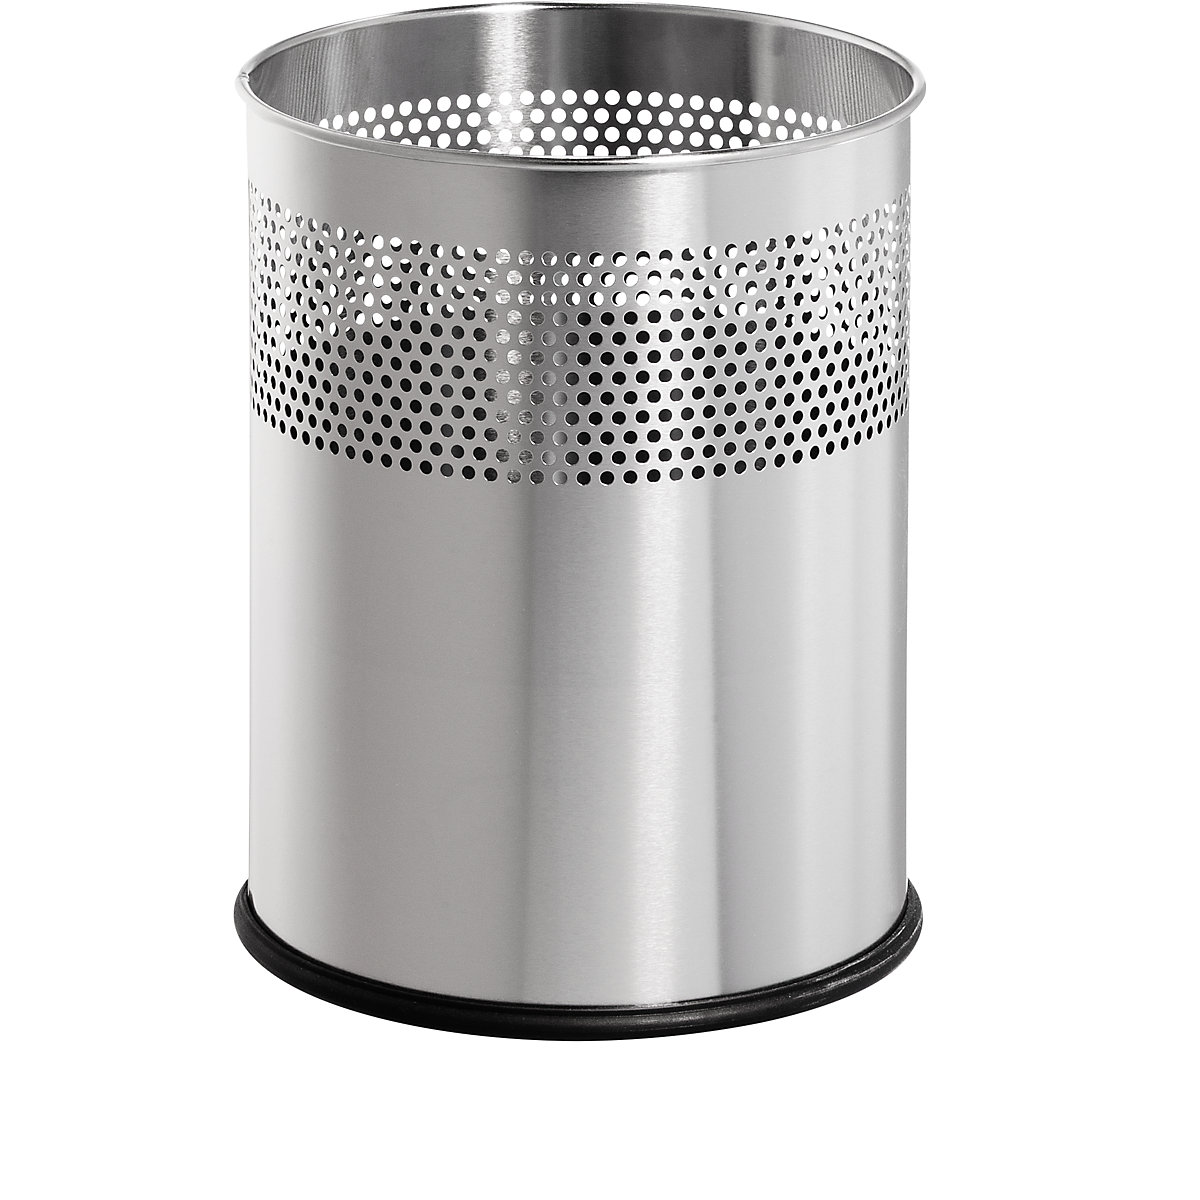 Waste paper bin, stainless steel with perforated pattern - helit